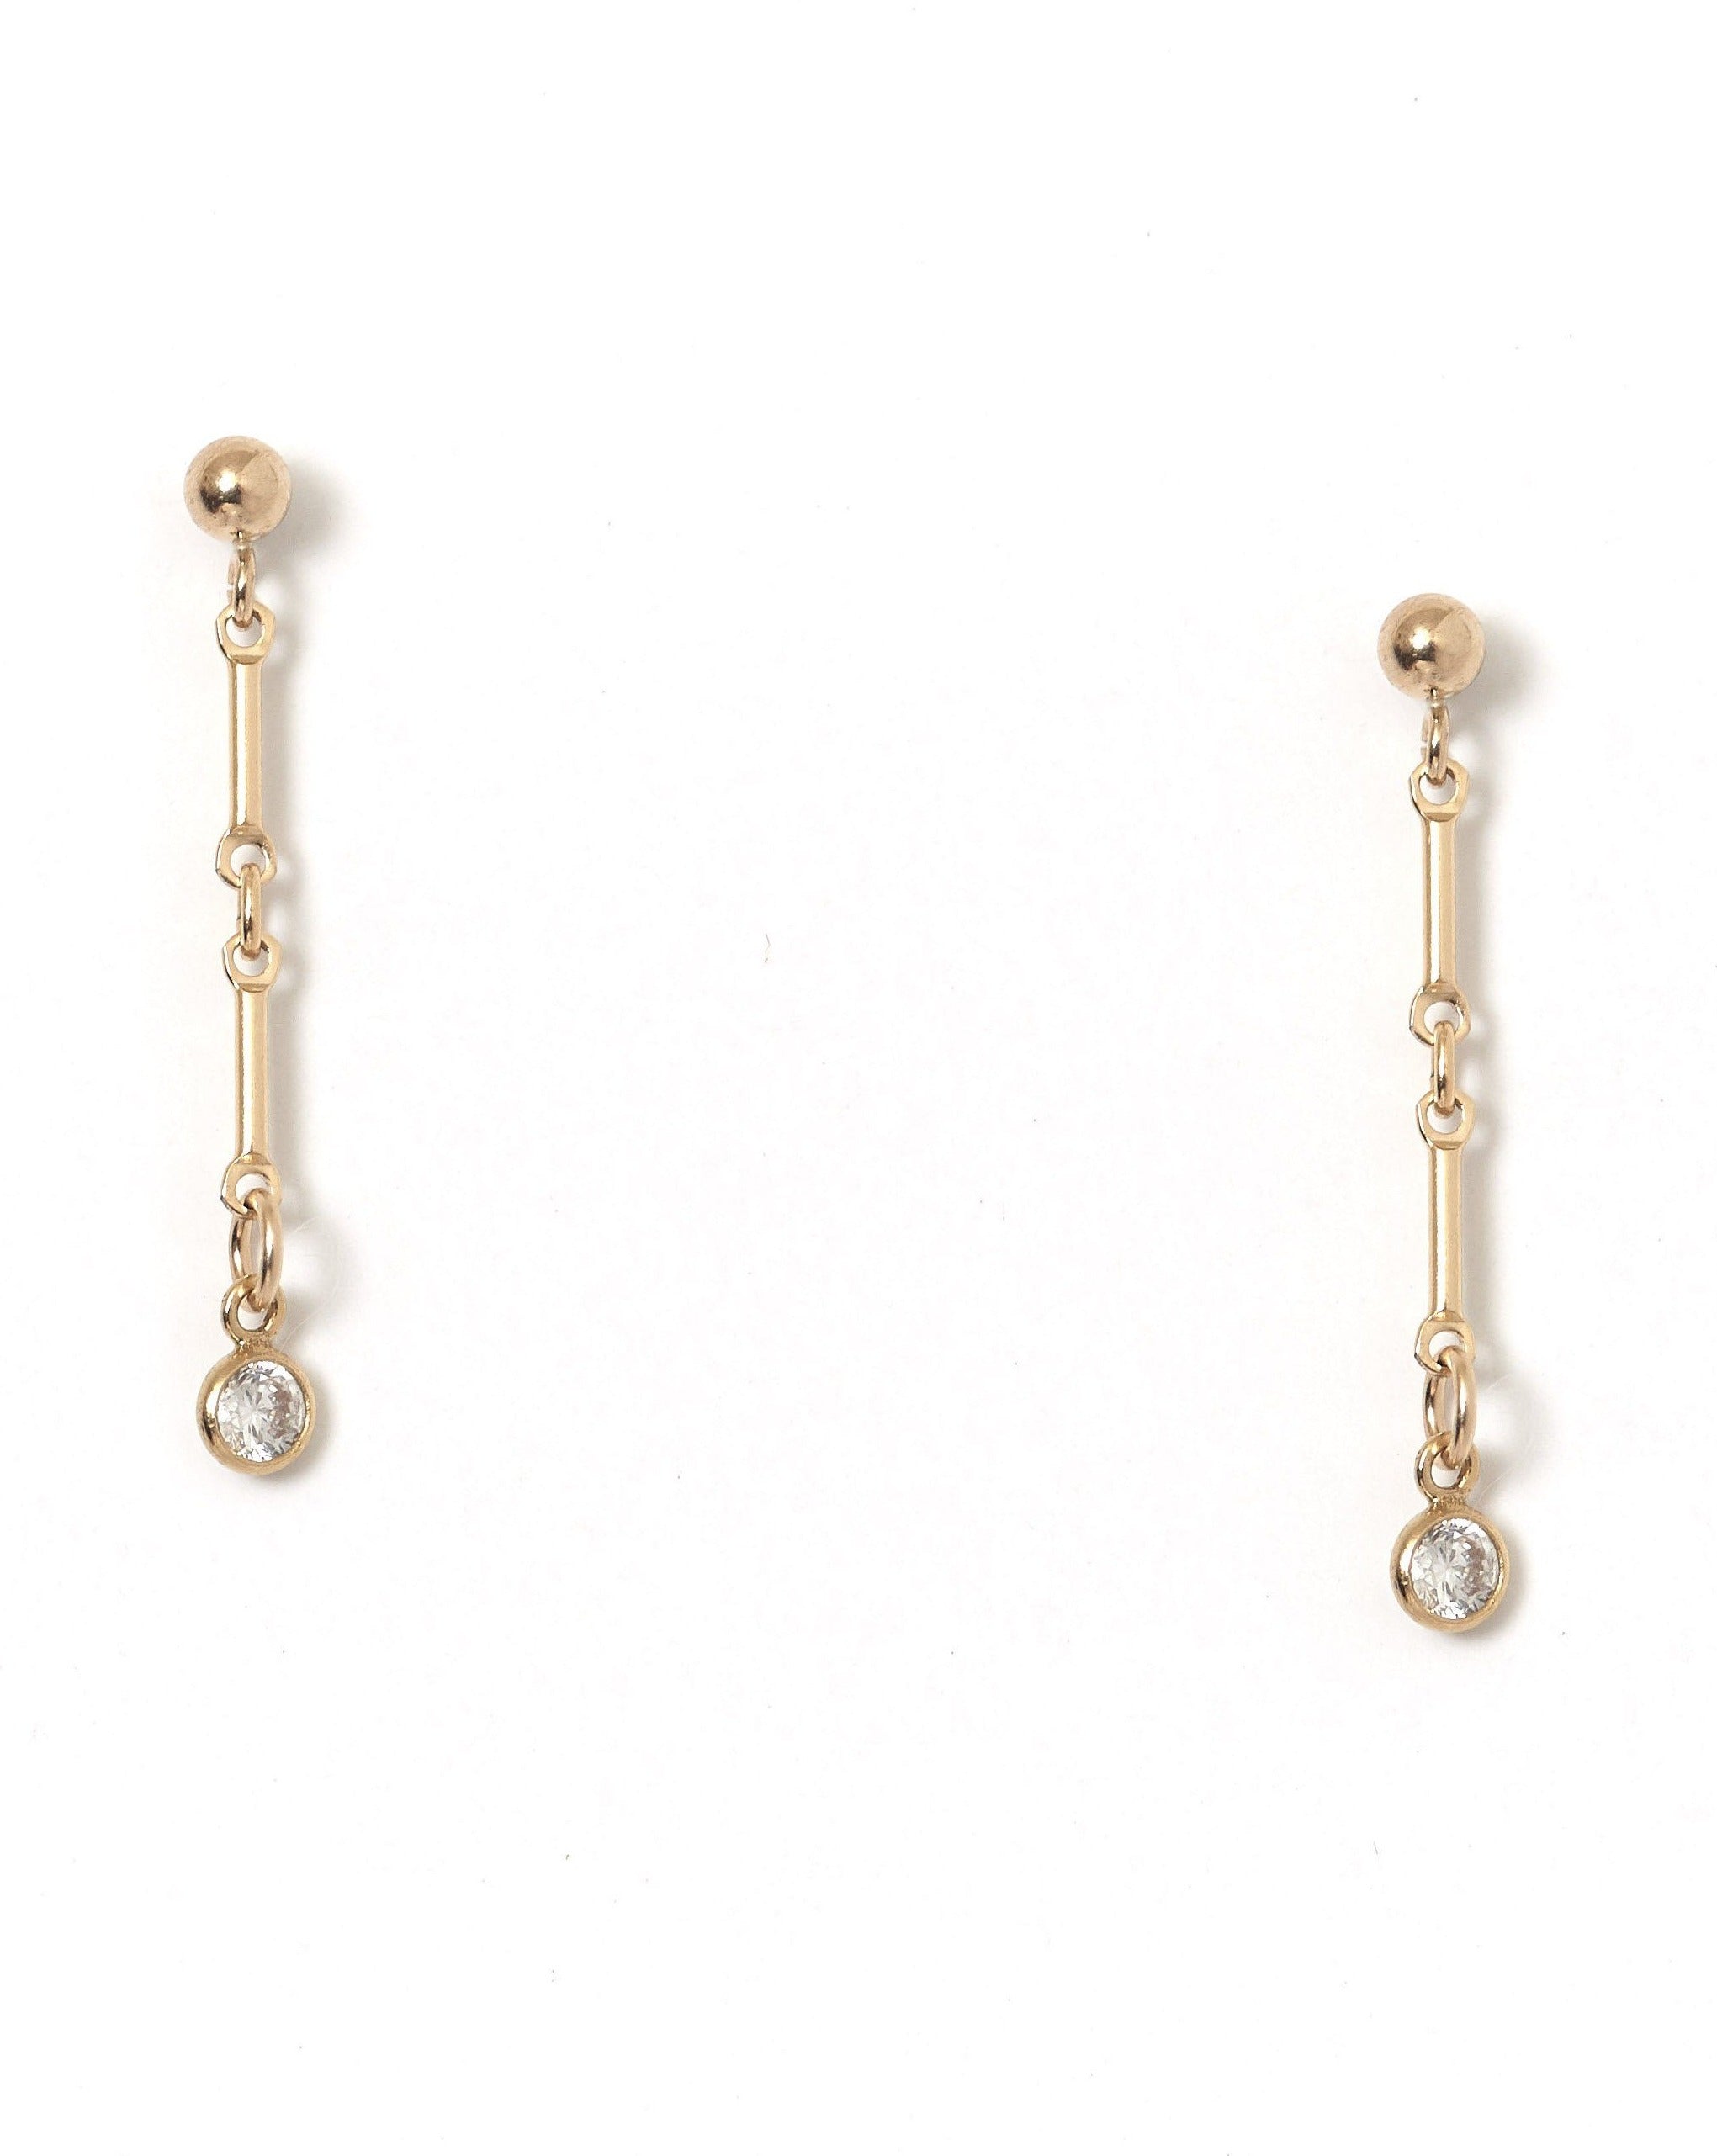 Desos Earrings by KOZAKH. 2 inch drop, 3mm Ball stud earrings, crafted in 14K Gold Filled, featuring a 3mm Swarovski Crystal bezel.